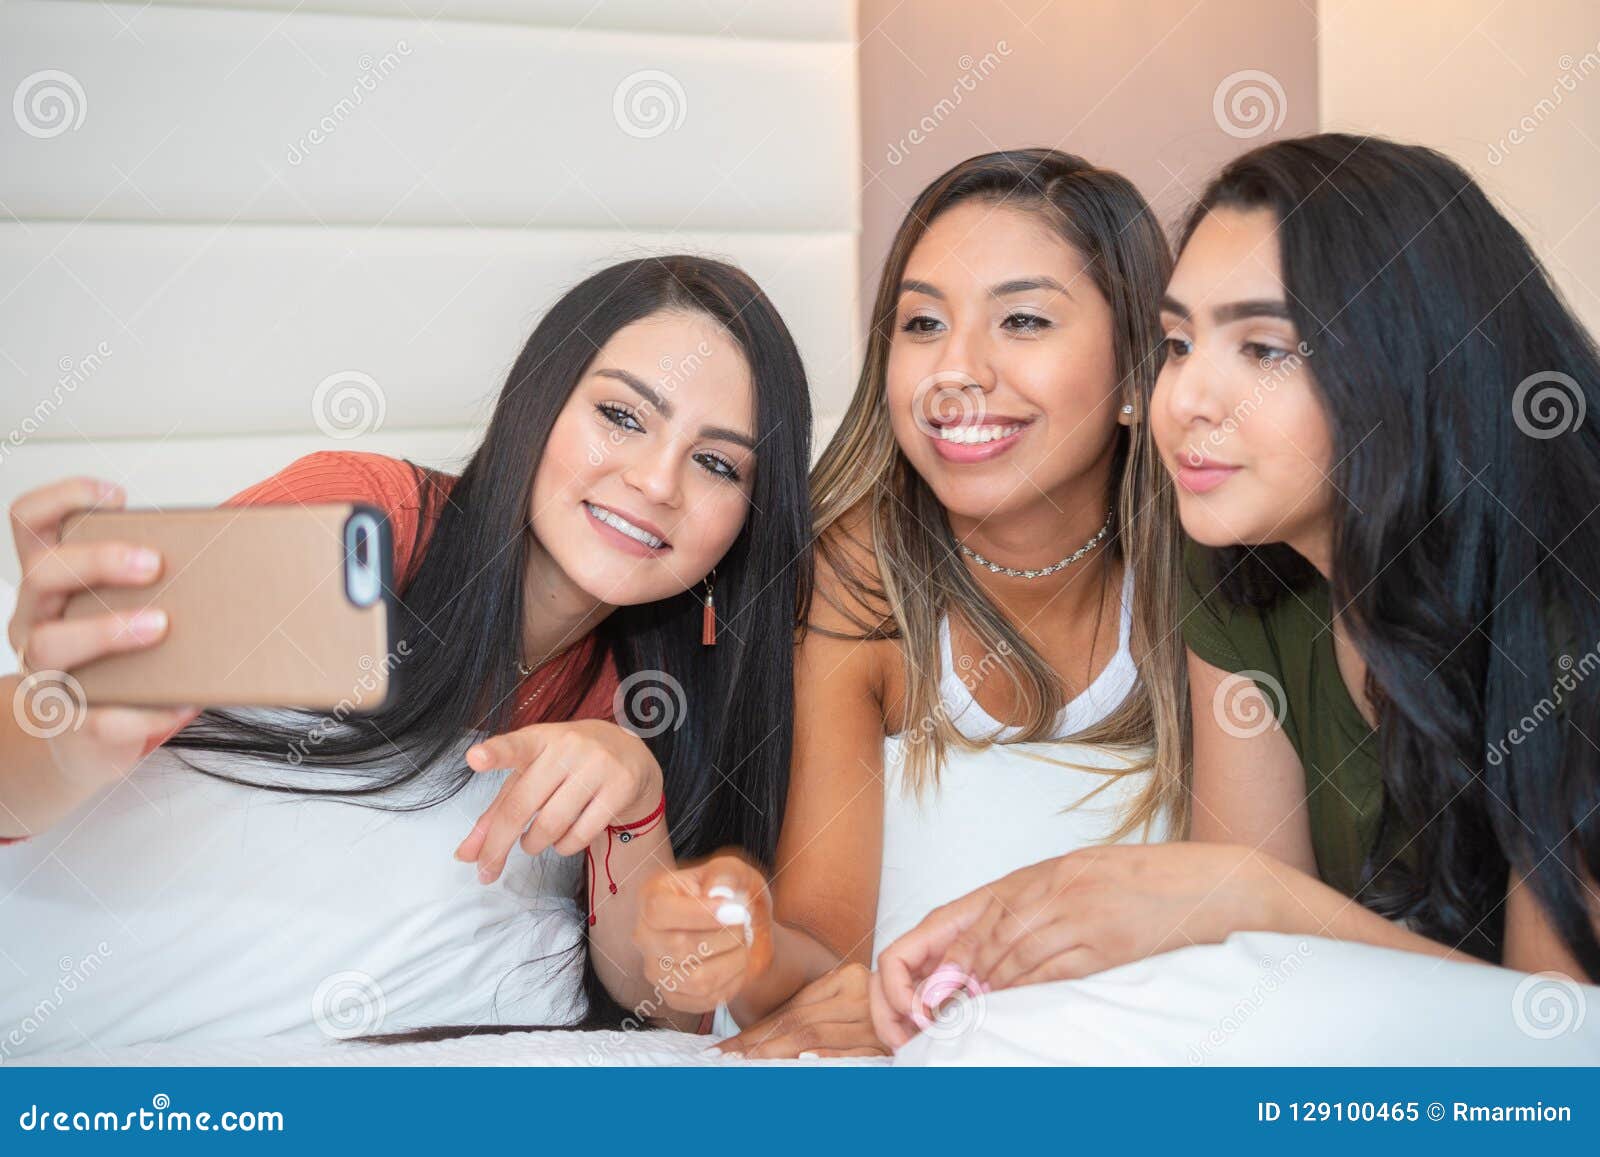 Group of Teen Girls in a Bedroom Stock Image - Image of lifestyle ...